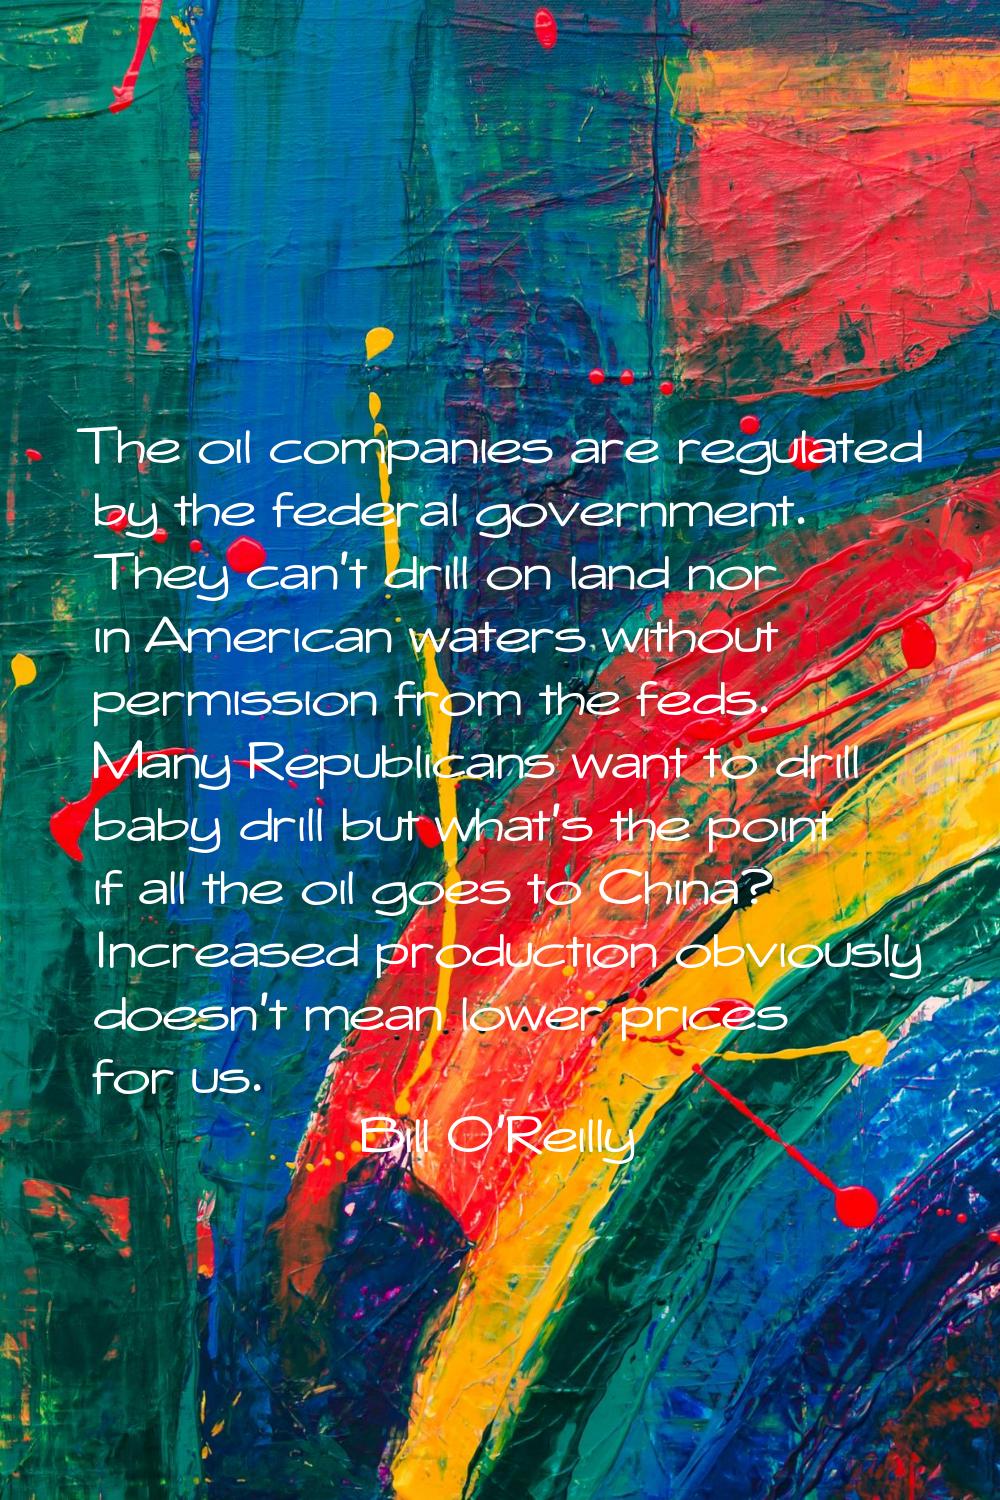 The oil companies are regulated by the federal government. They can't drill on land nor in American